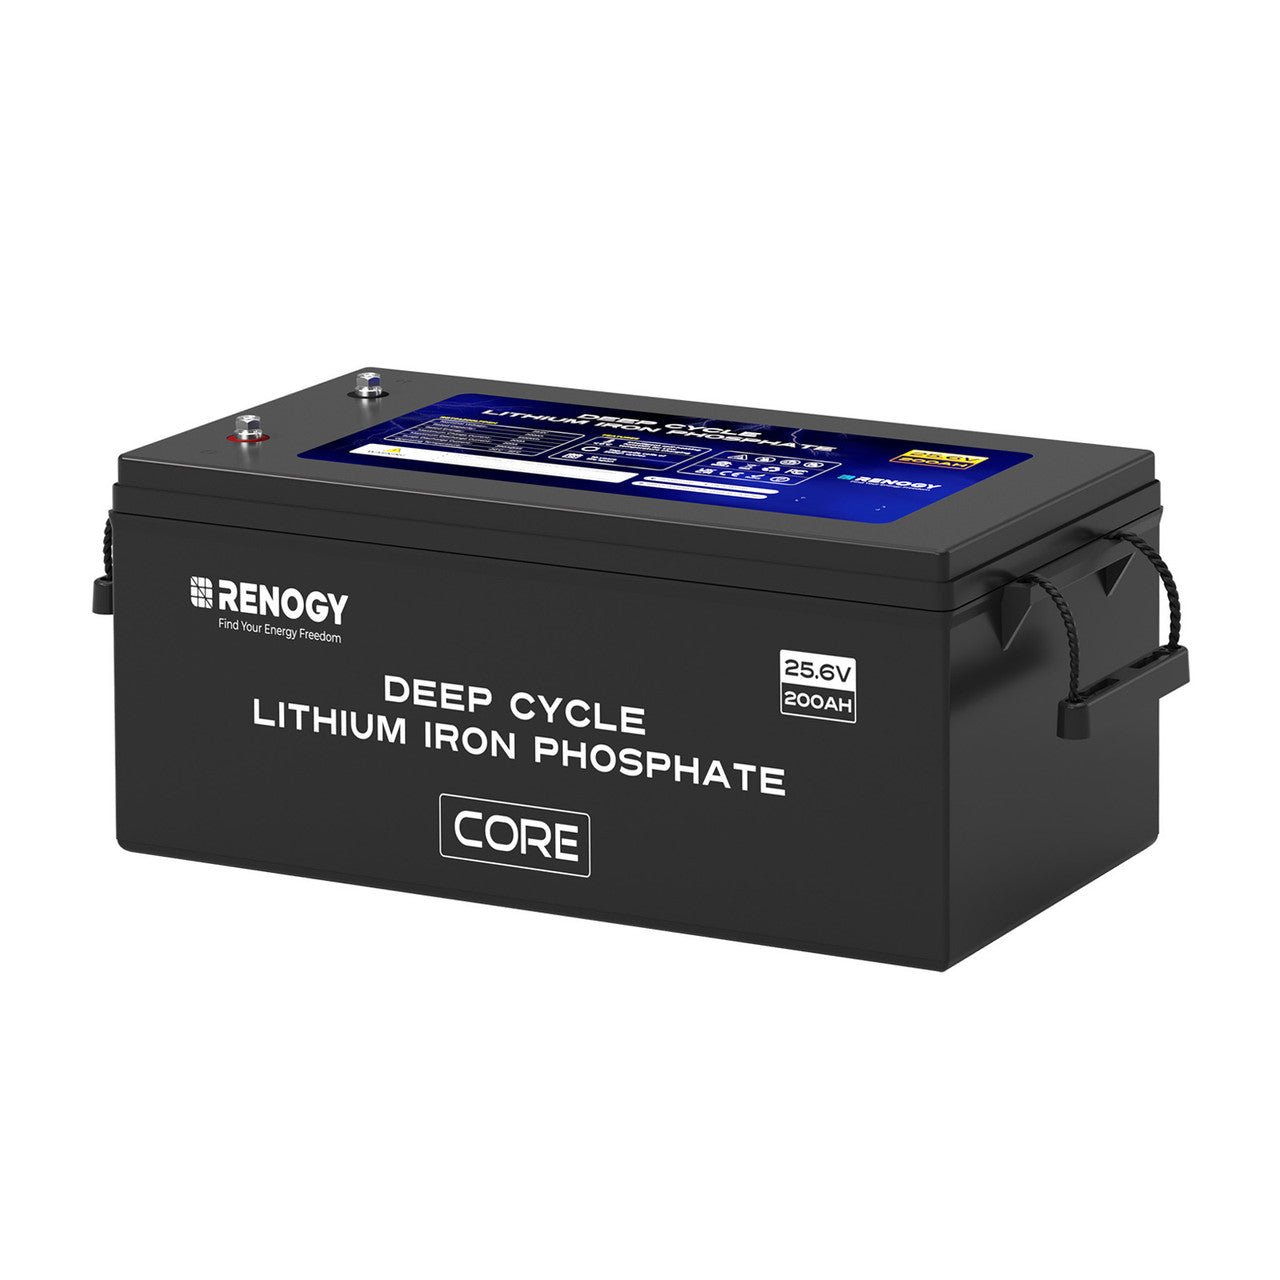 Renogy 24V 200Ah Core Series Deep Cycle Lithium Iron Phosphate Battery - Solar Generators and Power Stations Plus